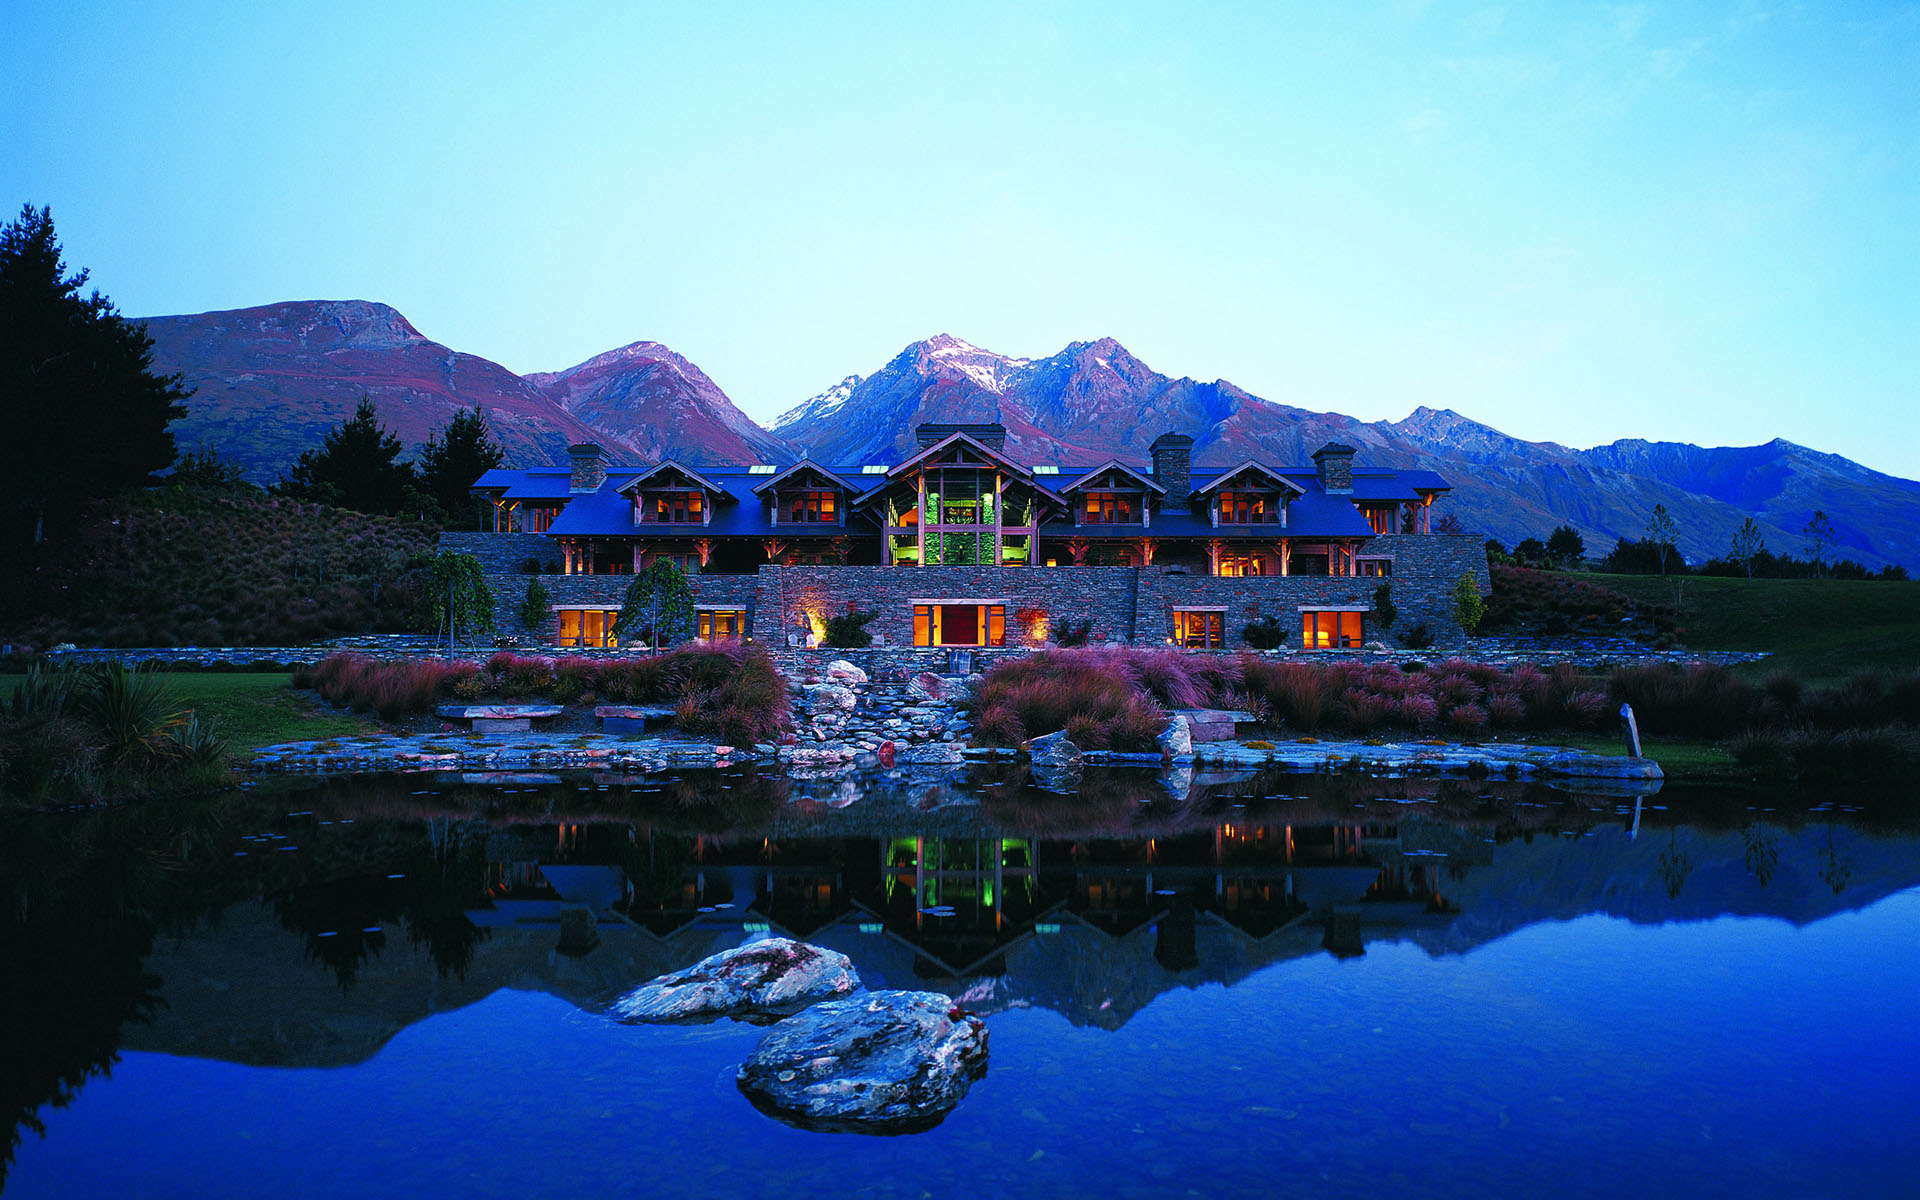 New Zealand Pond Hotel Reflection Mountains lakes wallpaper background